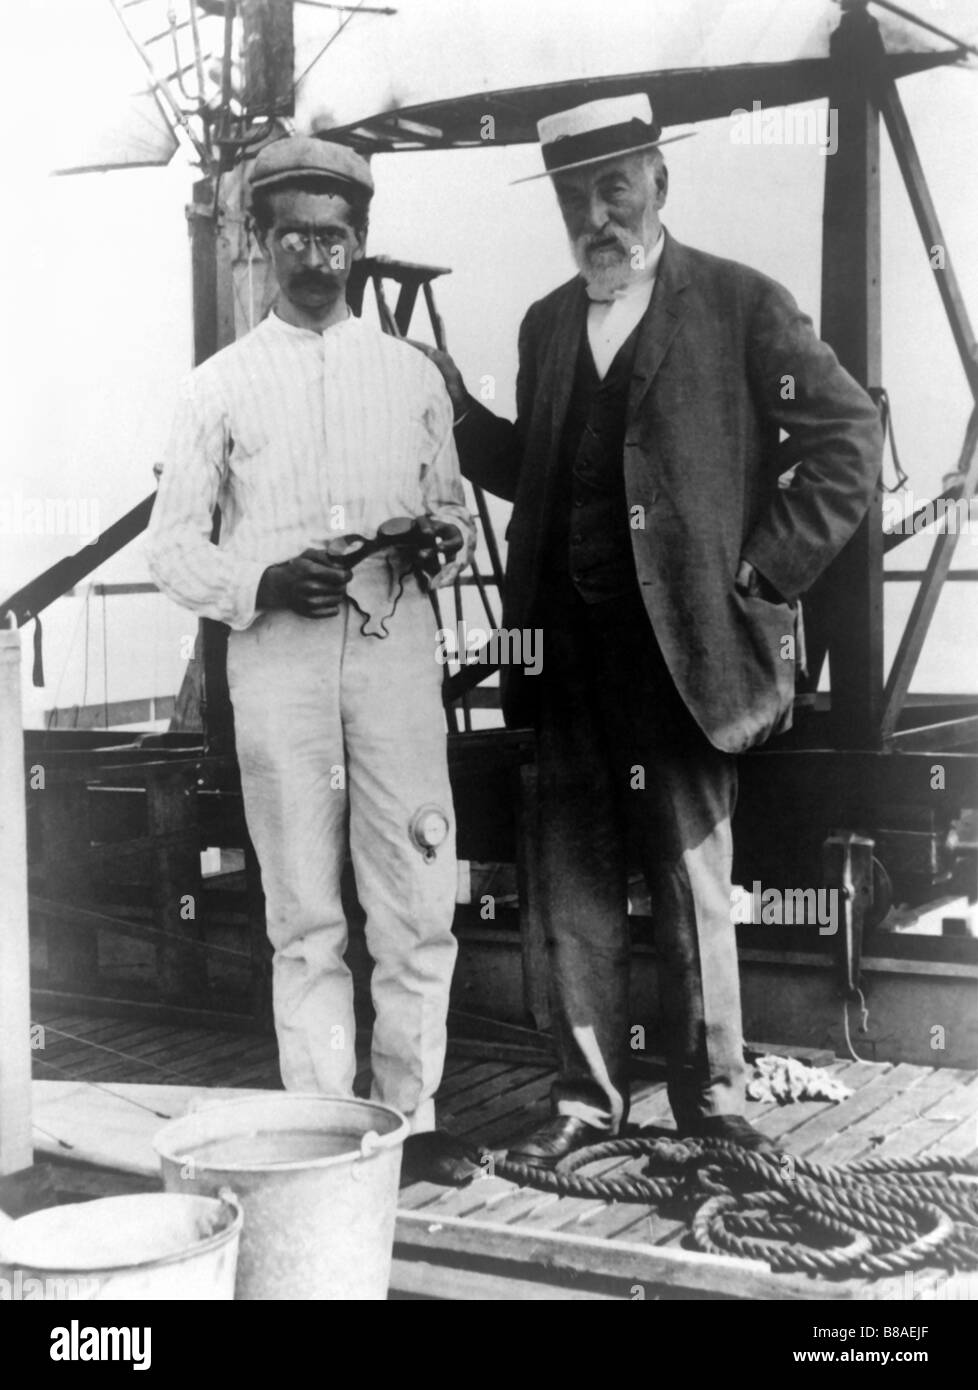 Samuel Pierpont Langley e Charles M. Manly Foto Stock